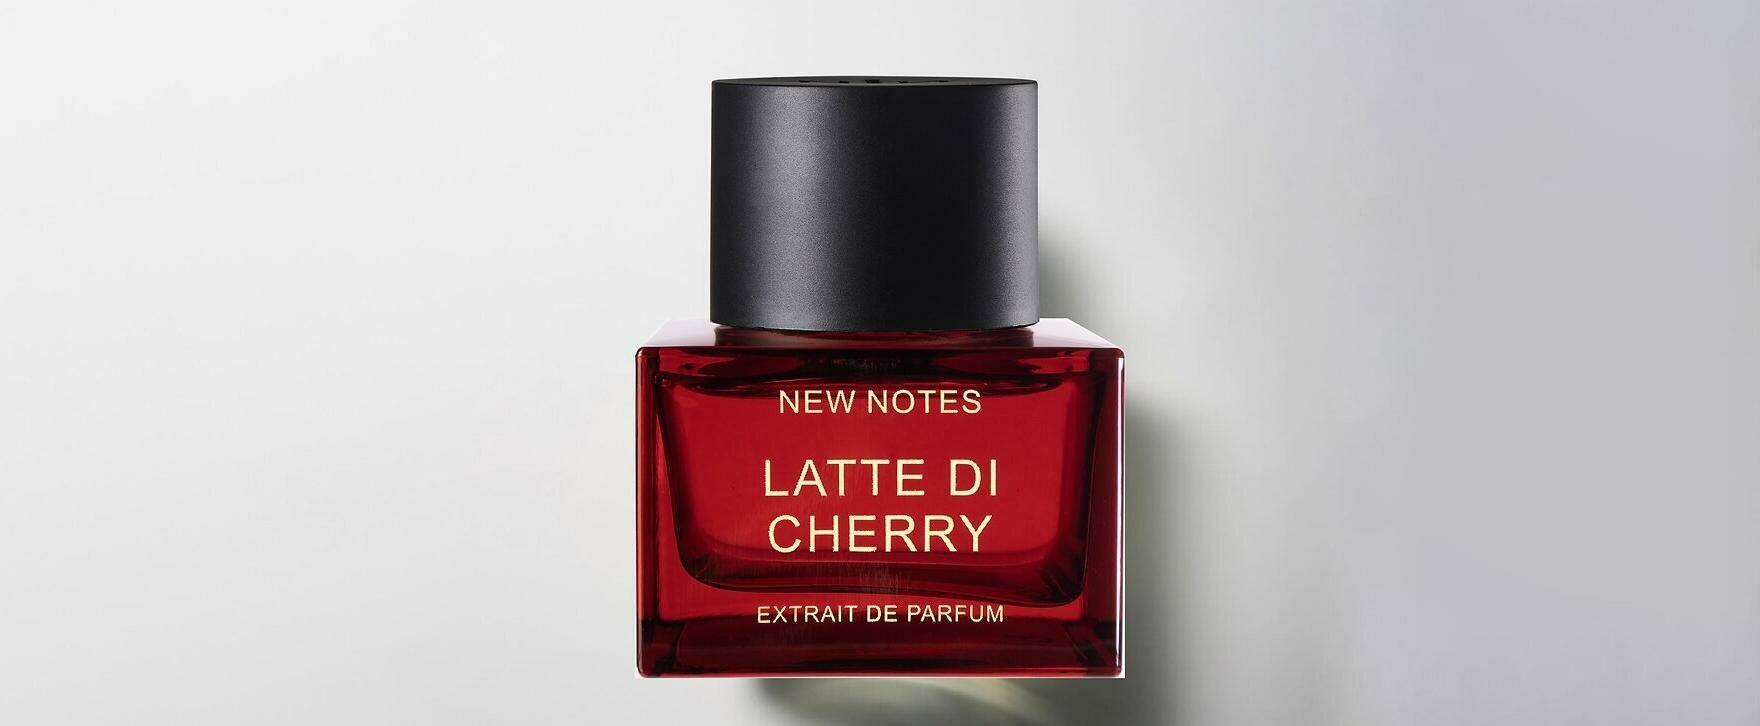 New Notes Introduces the New Fruity-gourmand Fragrance "Latte di Cherry"